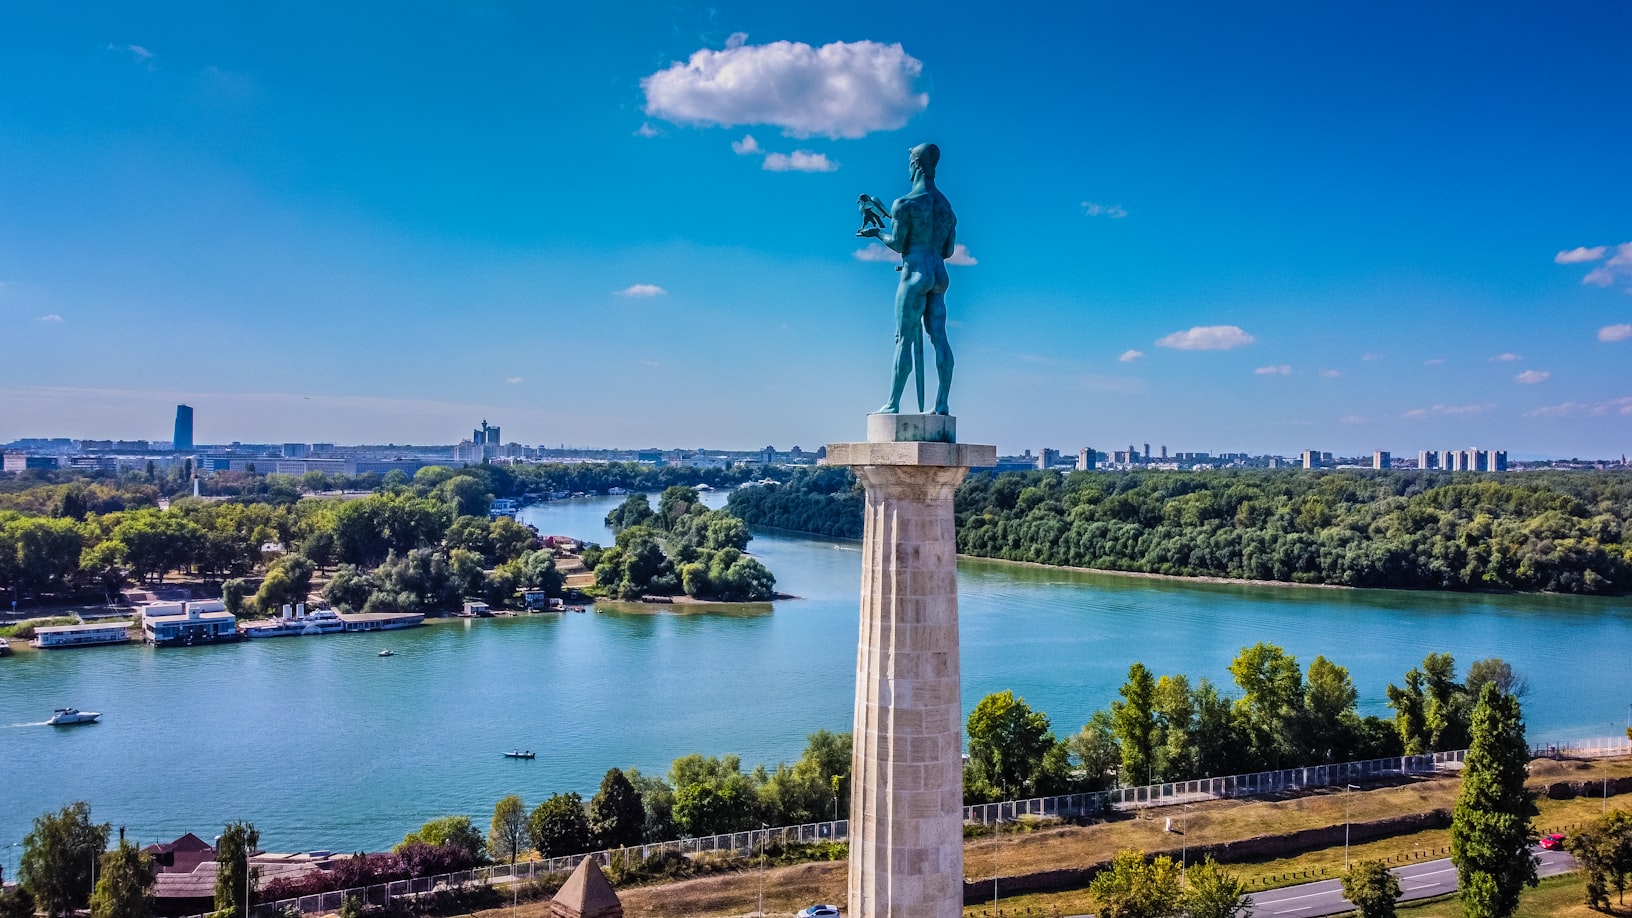 Serbia Travel Guide - Attractions, What to See, Do, Costs, FAQs